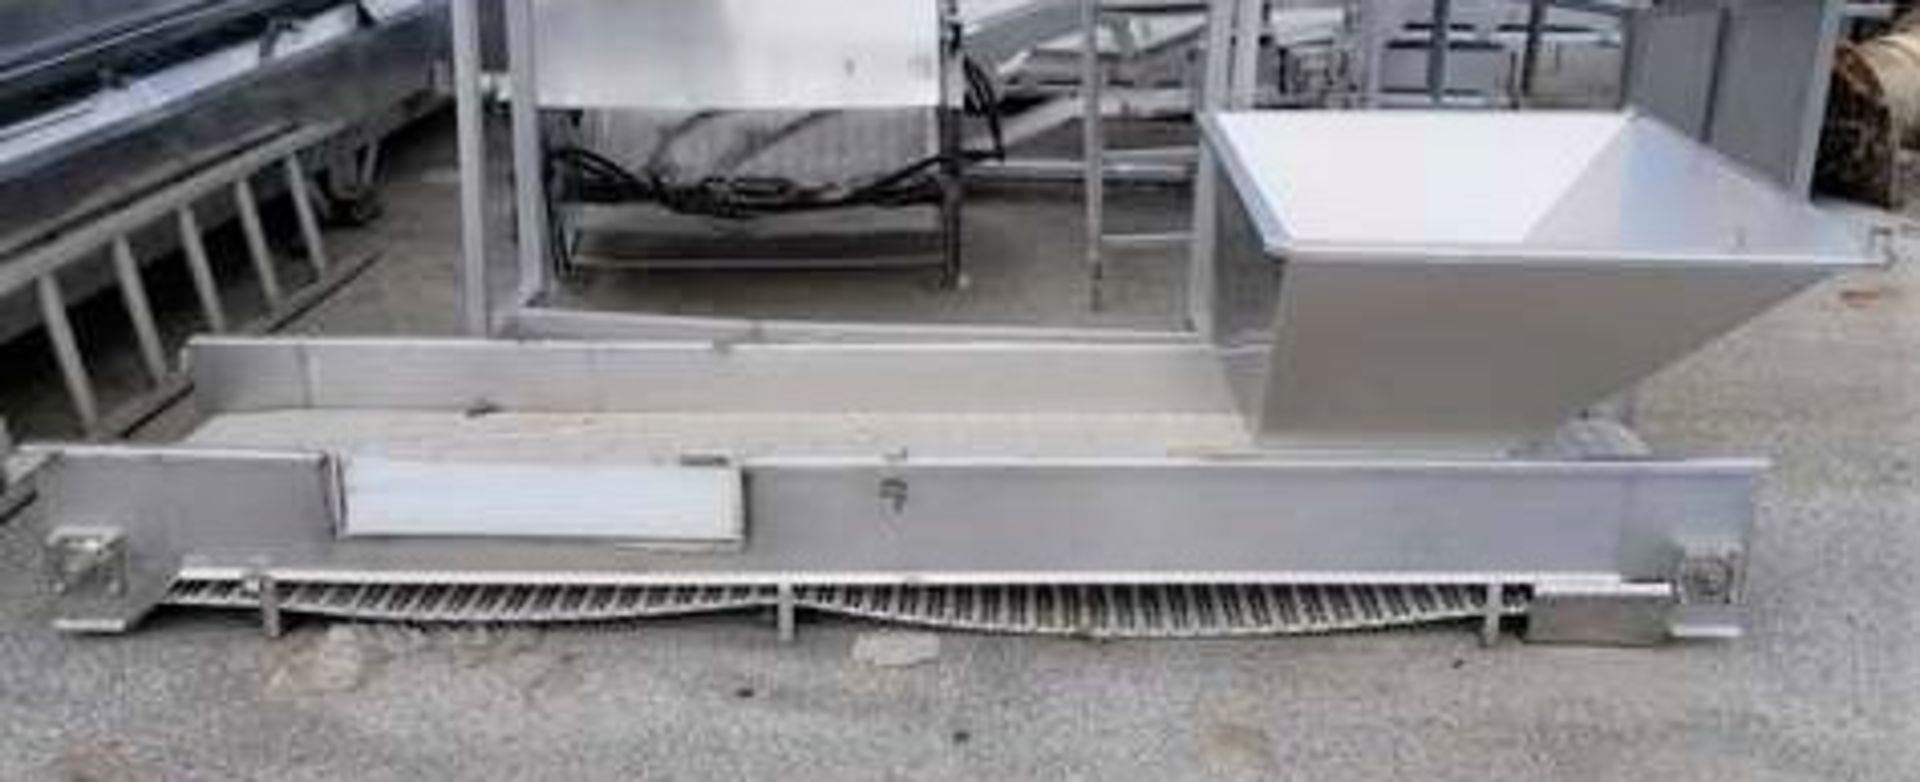 Flat UHMW belt S/S Conveyor with Hopper. 10'L x 24"W belt. Hopper is 17" in from infeed end. Product